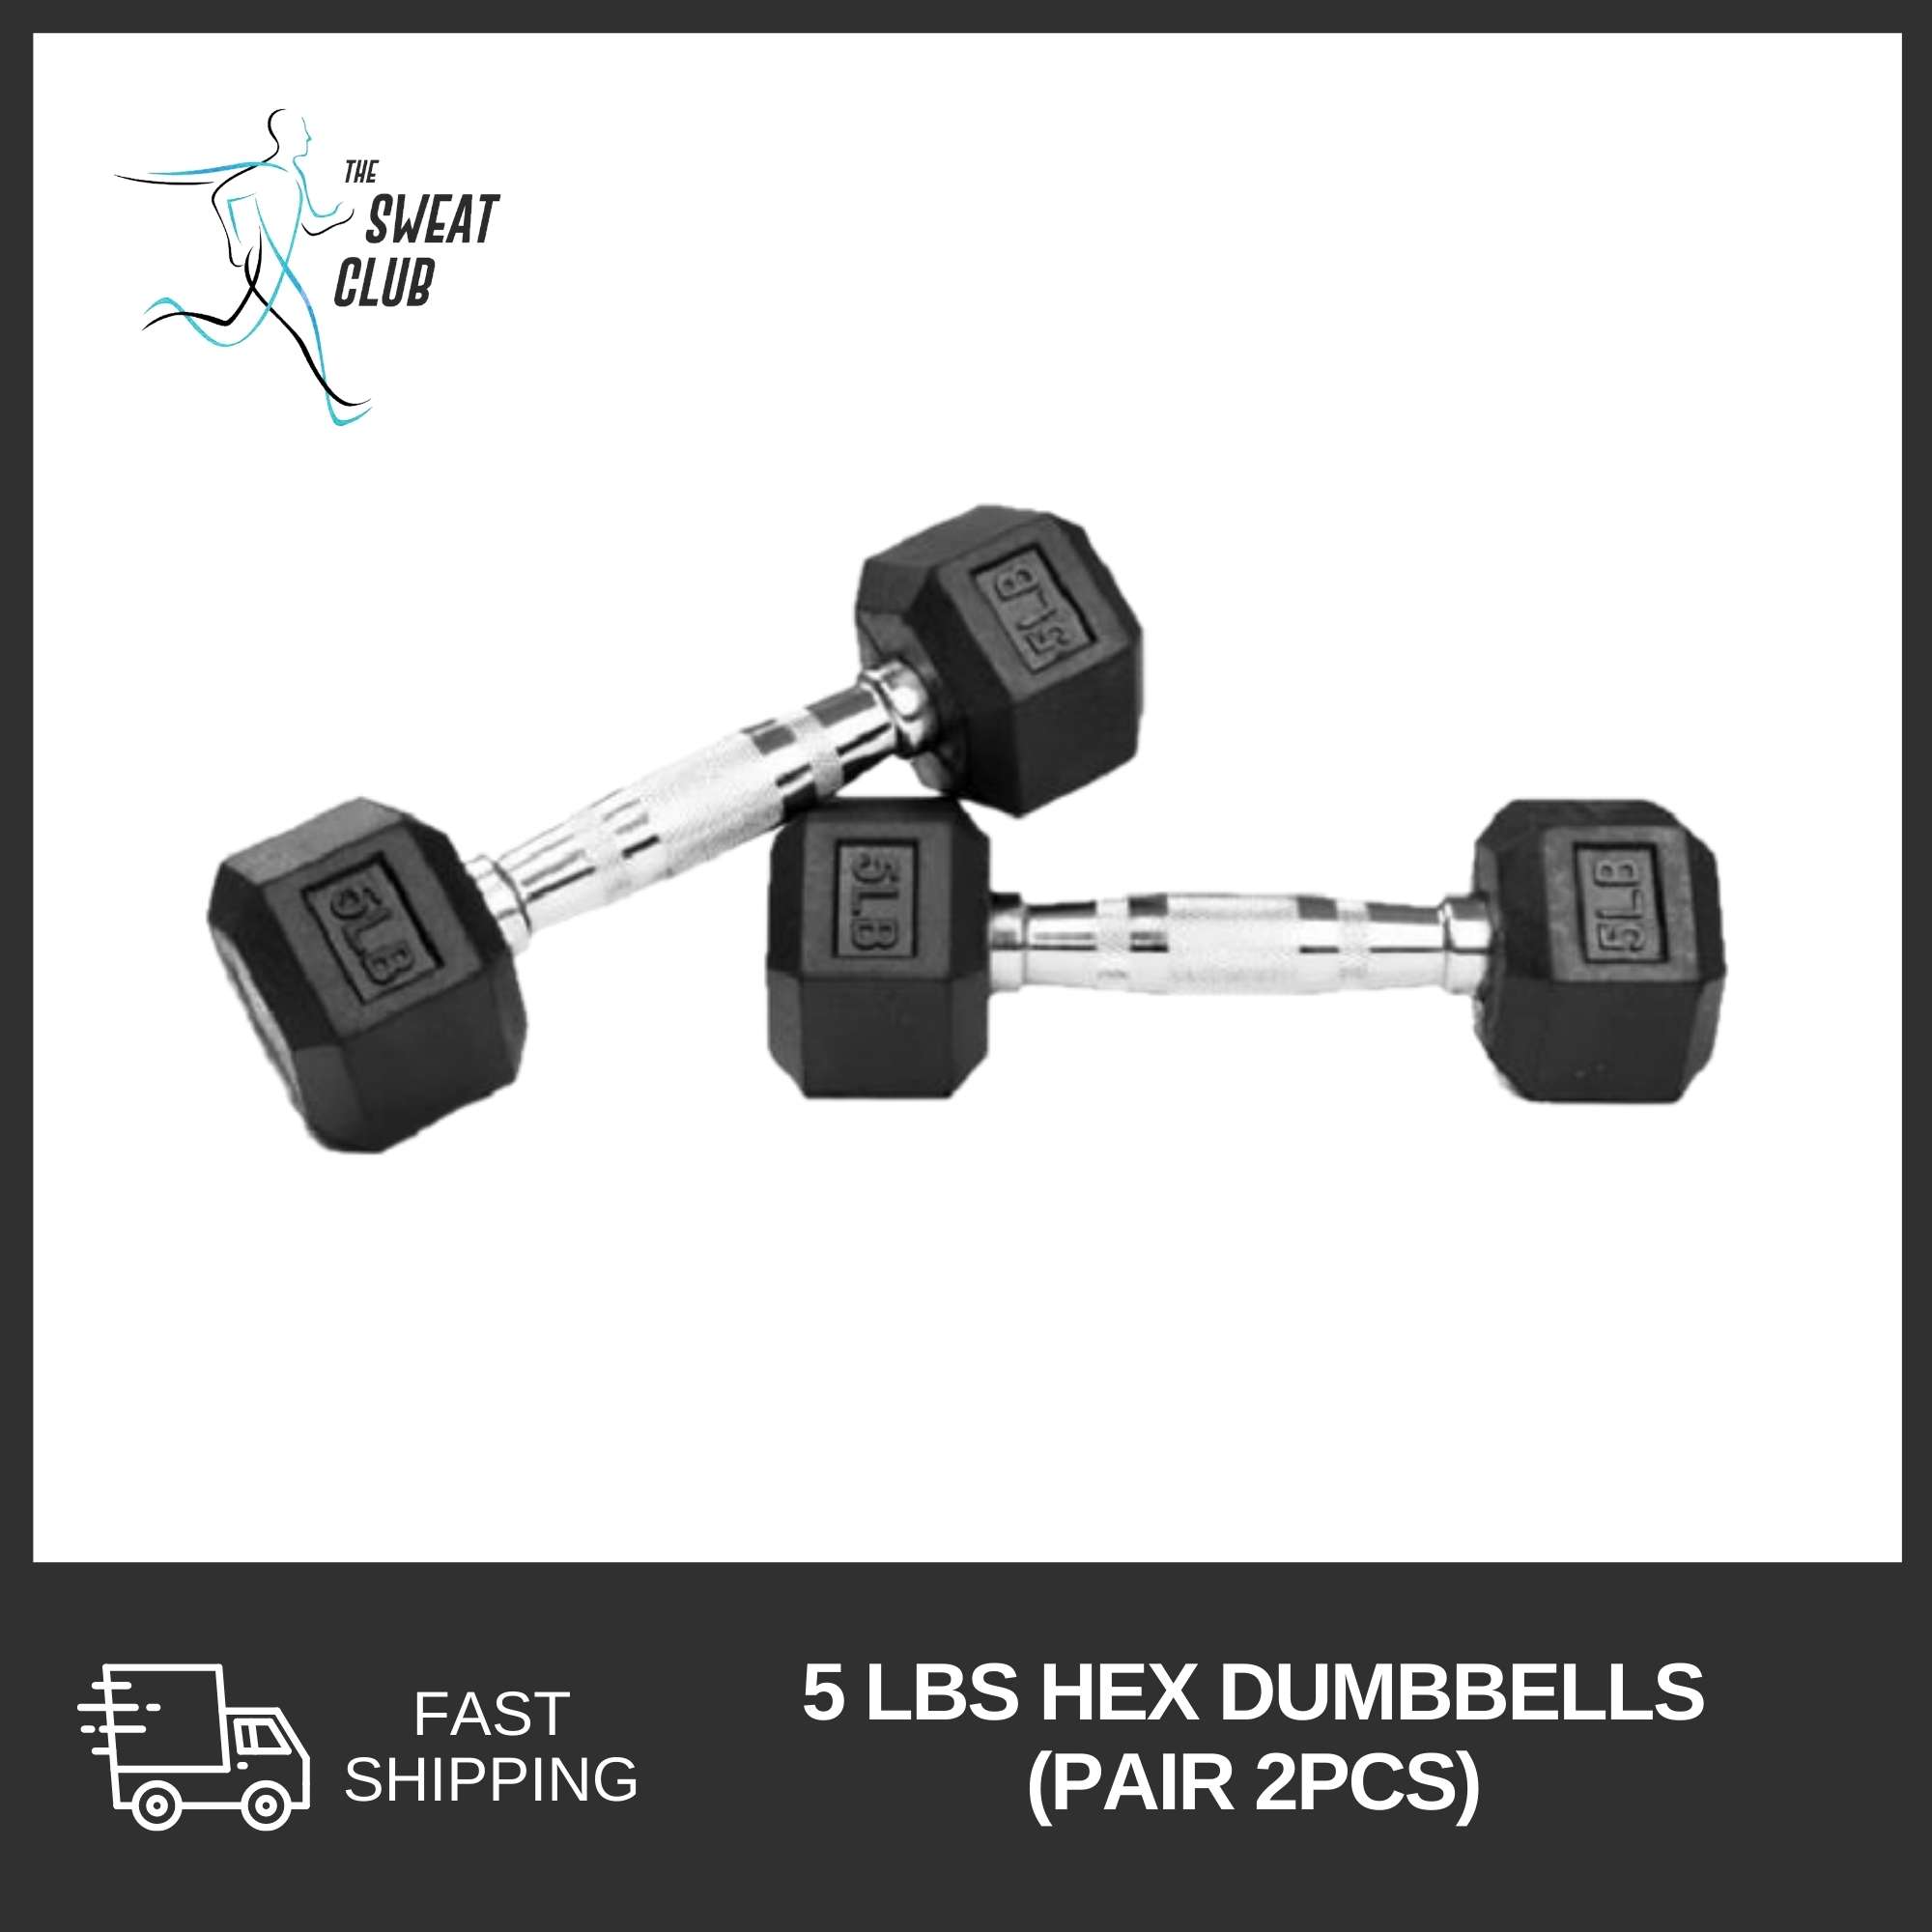 NEW Dumbbell CAP Barbell Coated Hex Rubber Lifting Weight5 10 30 100 Lb HOME GYM 